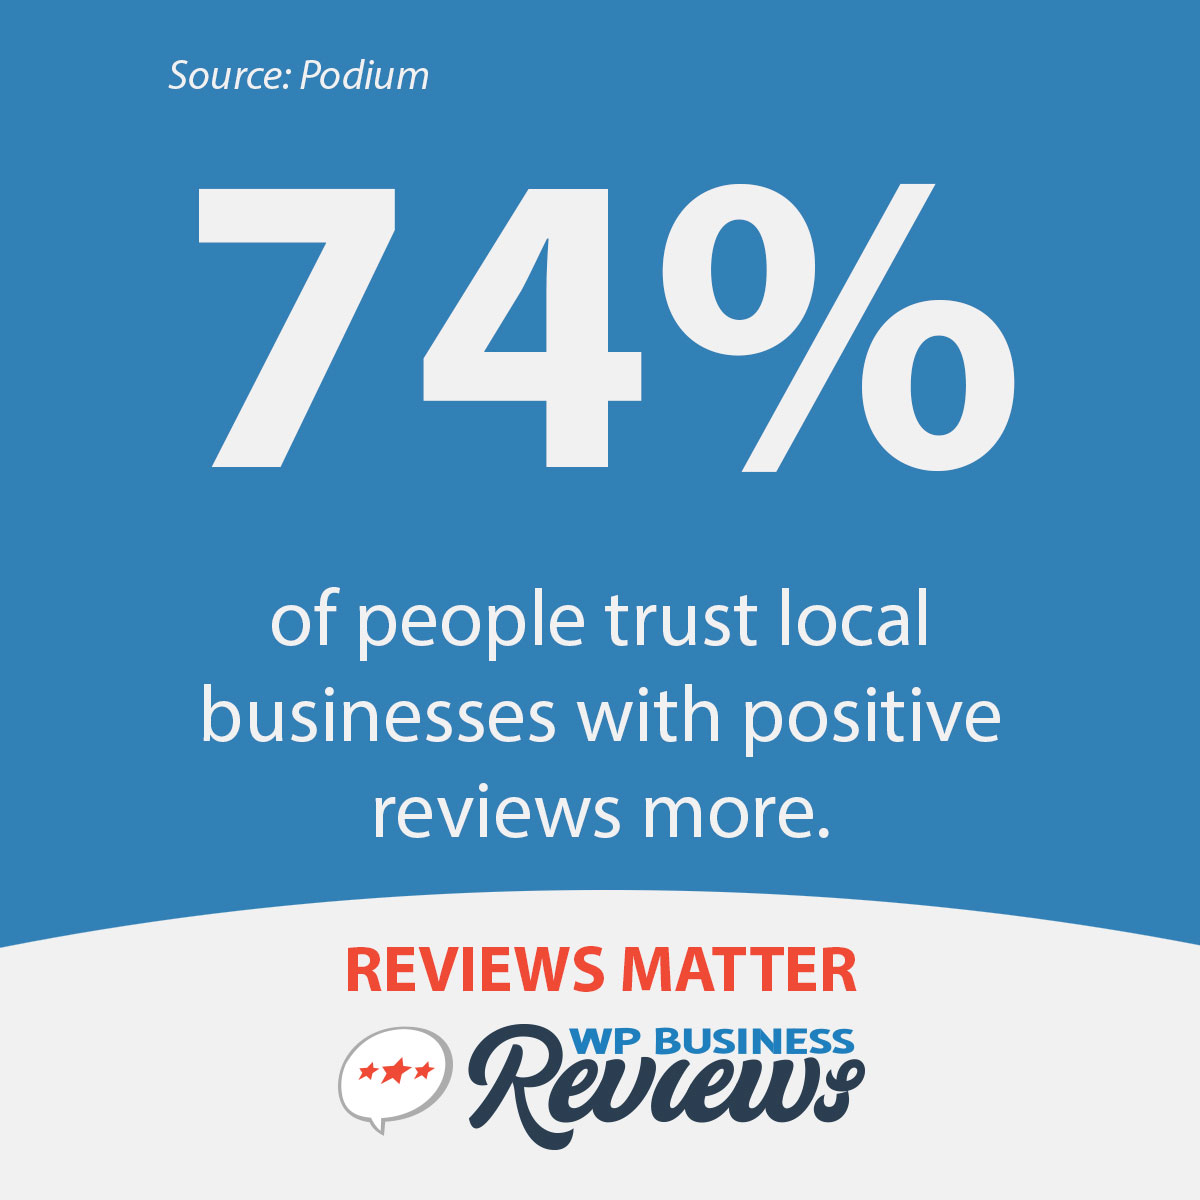 According to Podium, 74% of people trust local businesses with positive reviews more.